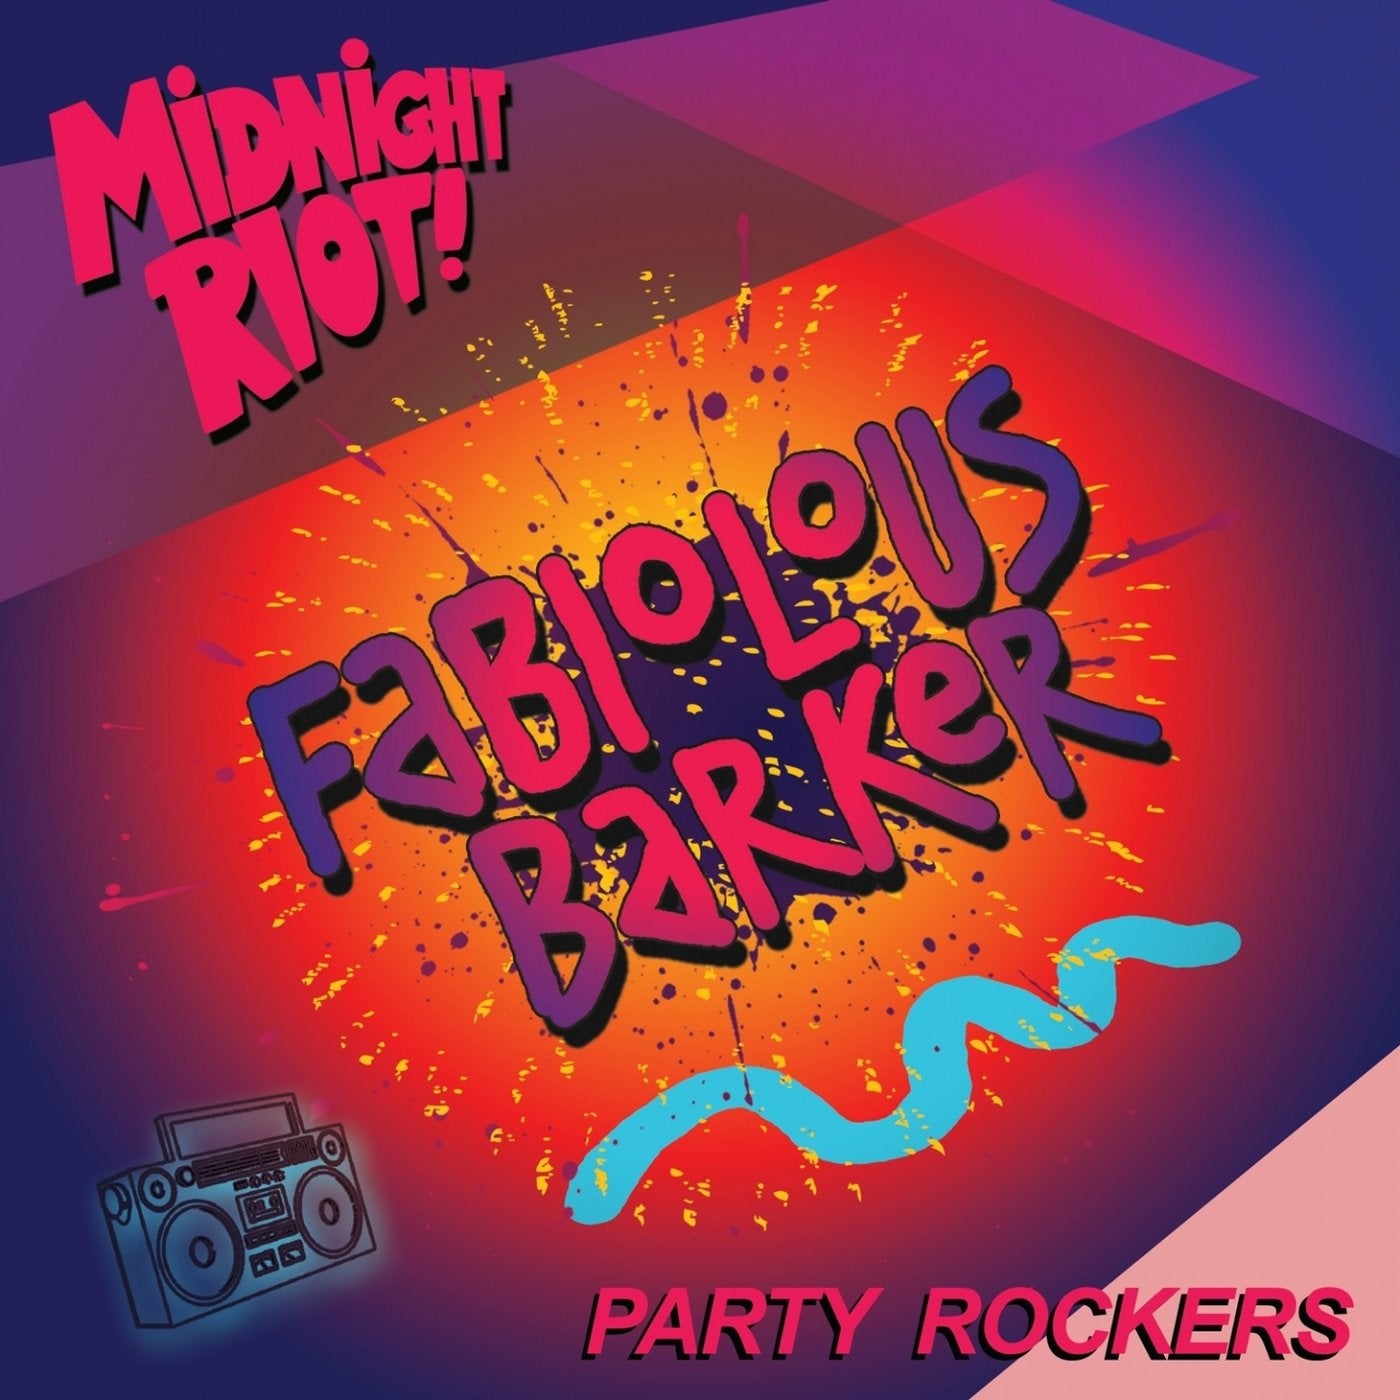 Party Rockers